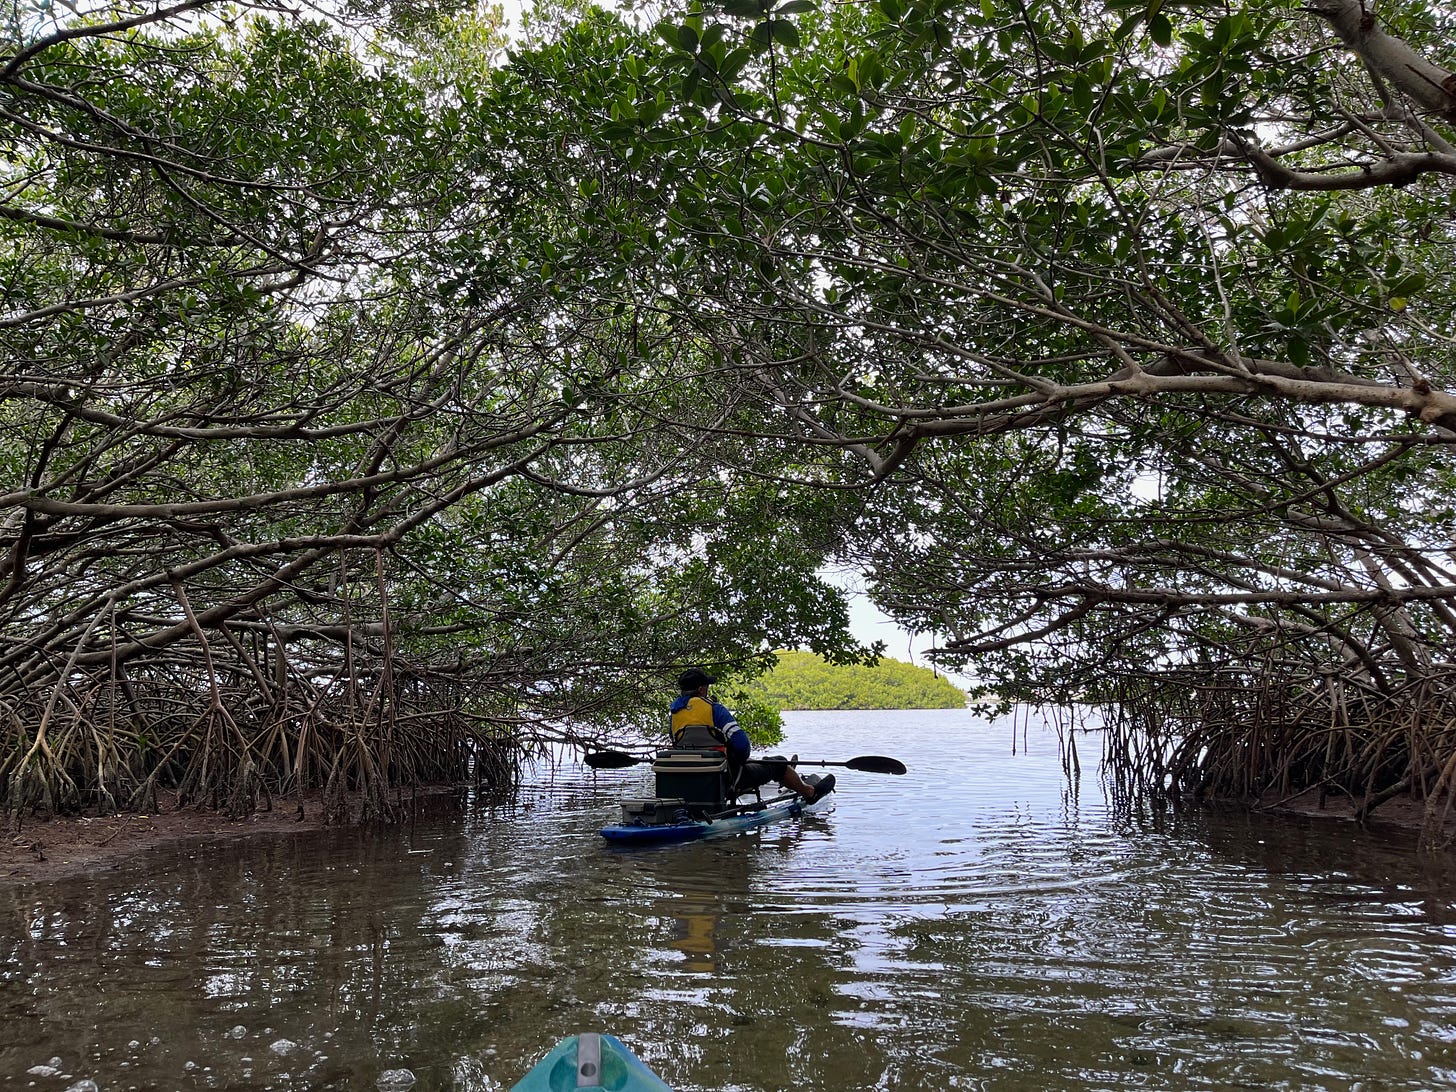 A picture of the author kayaking through a mangrove near Fort Lauderdale.